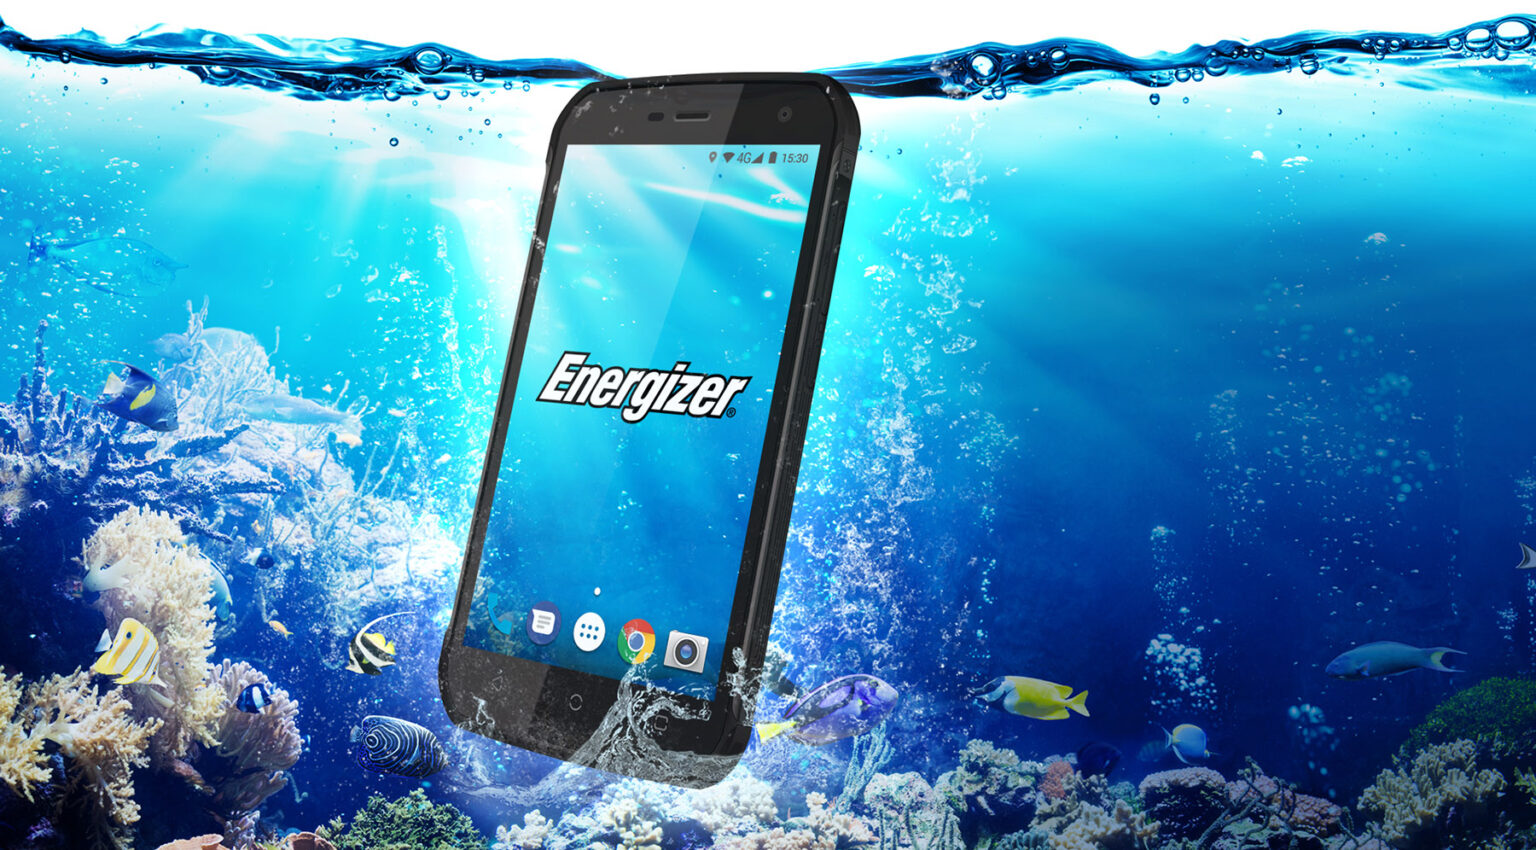 Tough And Elegant Energizer ENERGY E520 LTE Smartphone Released